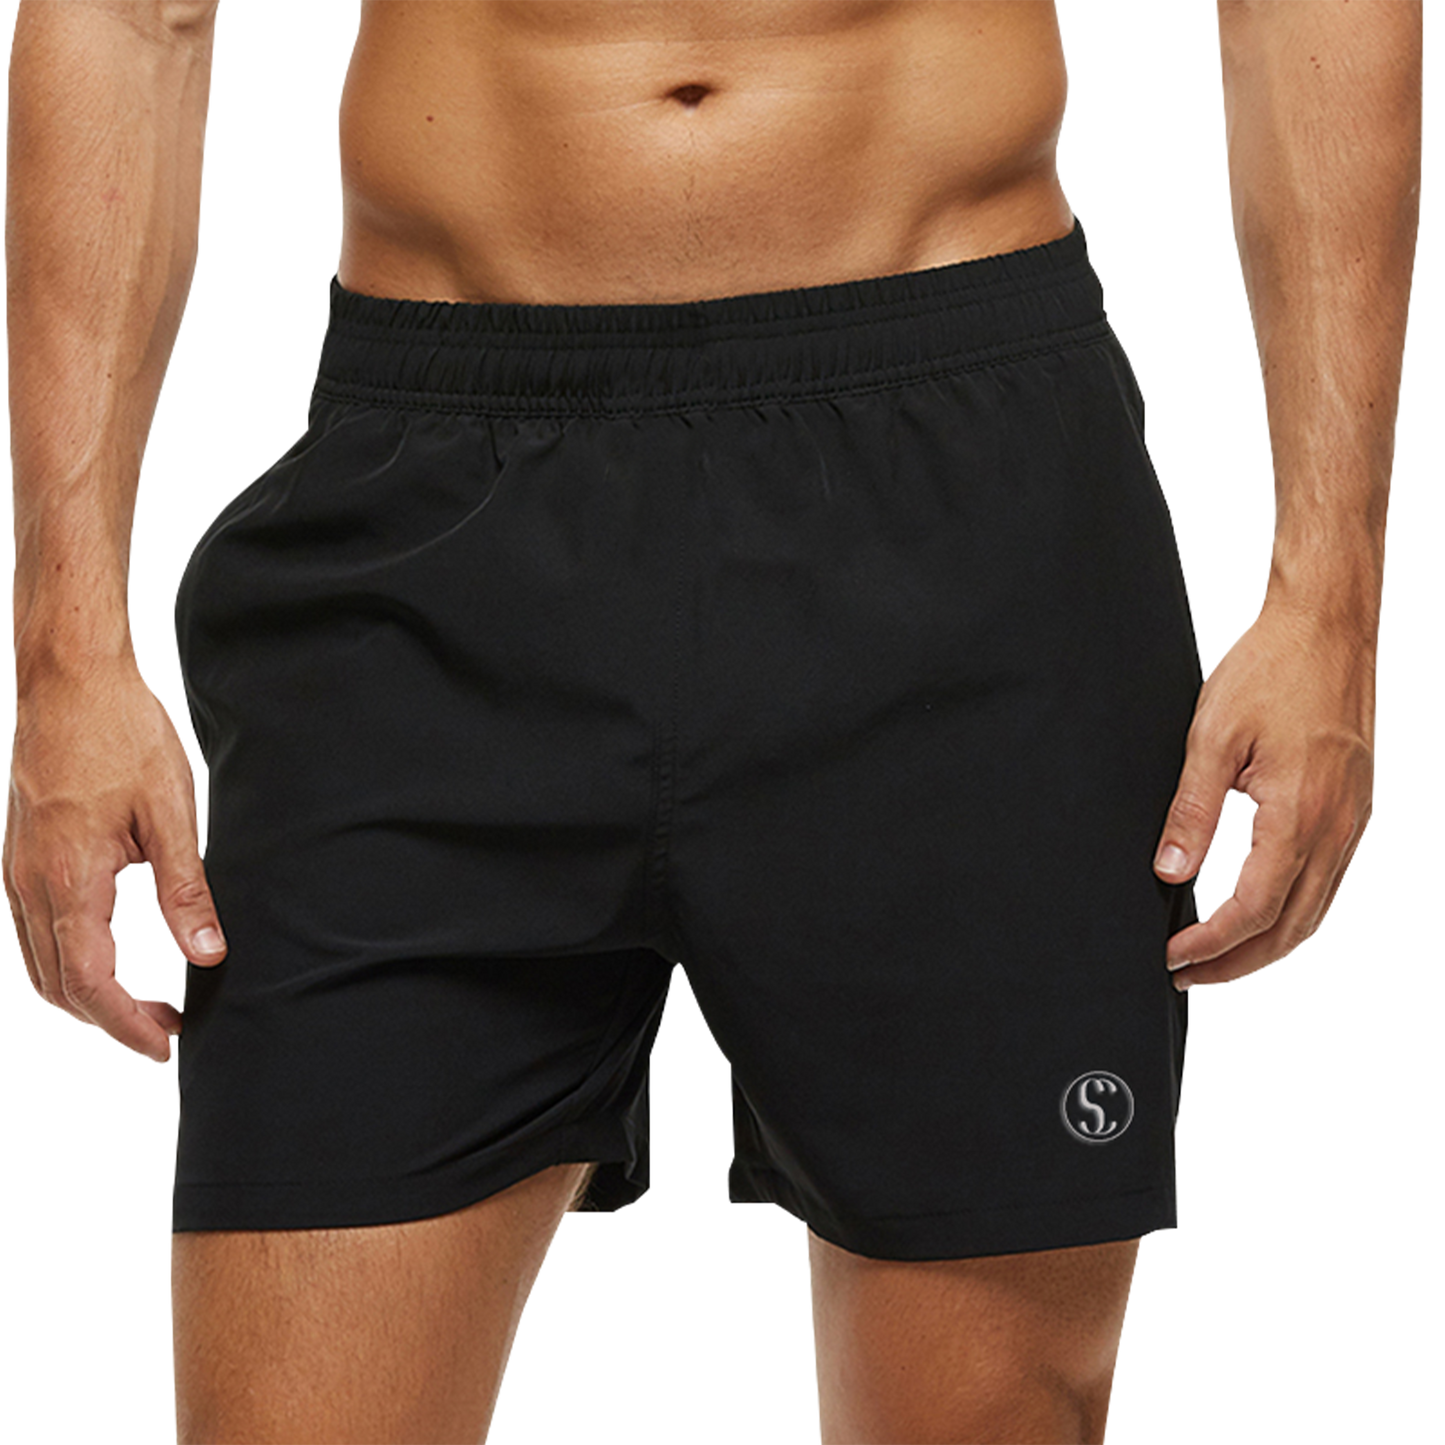 Black Men's Cotton Shorts for Running, Gym Workout, Fitness, Cycling Sporty Clad